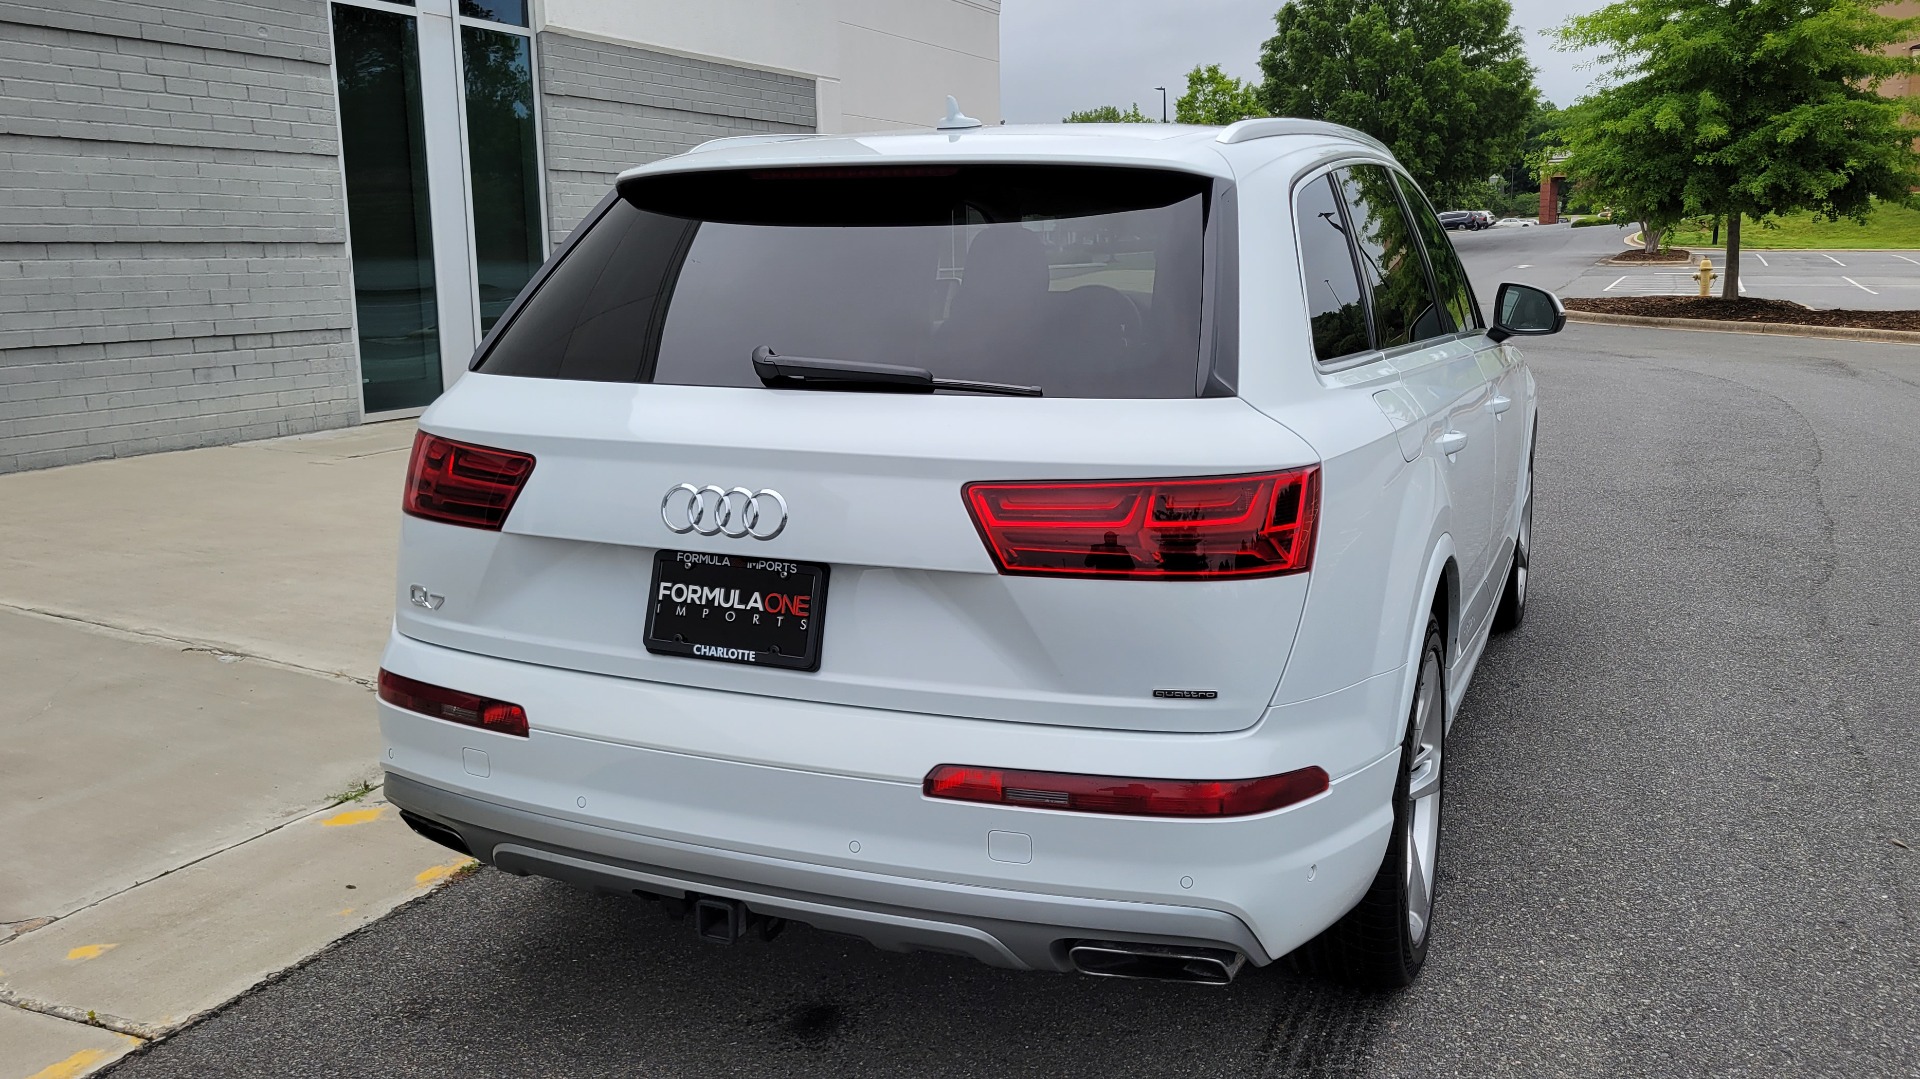 Used 2019 Audi Q7 PRESTIGE / CONV PKG / BOSE / HUD / CLD WTHR / TOWING / REARVIEW for sale $50,295 at Formula Imports in Charlotte NC 28227 8